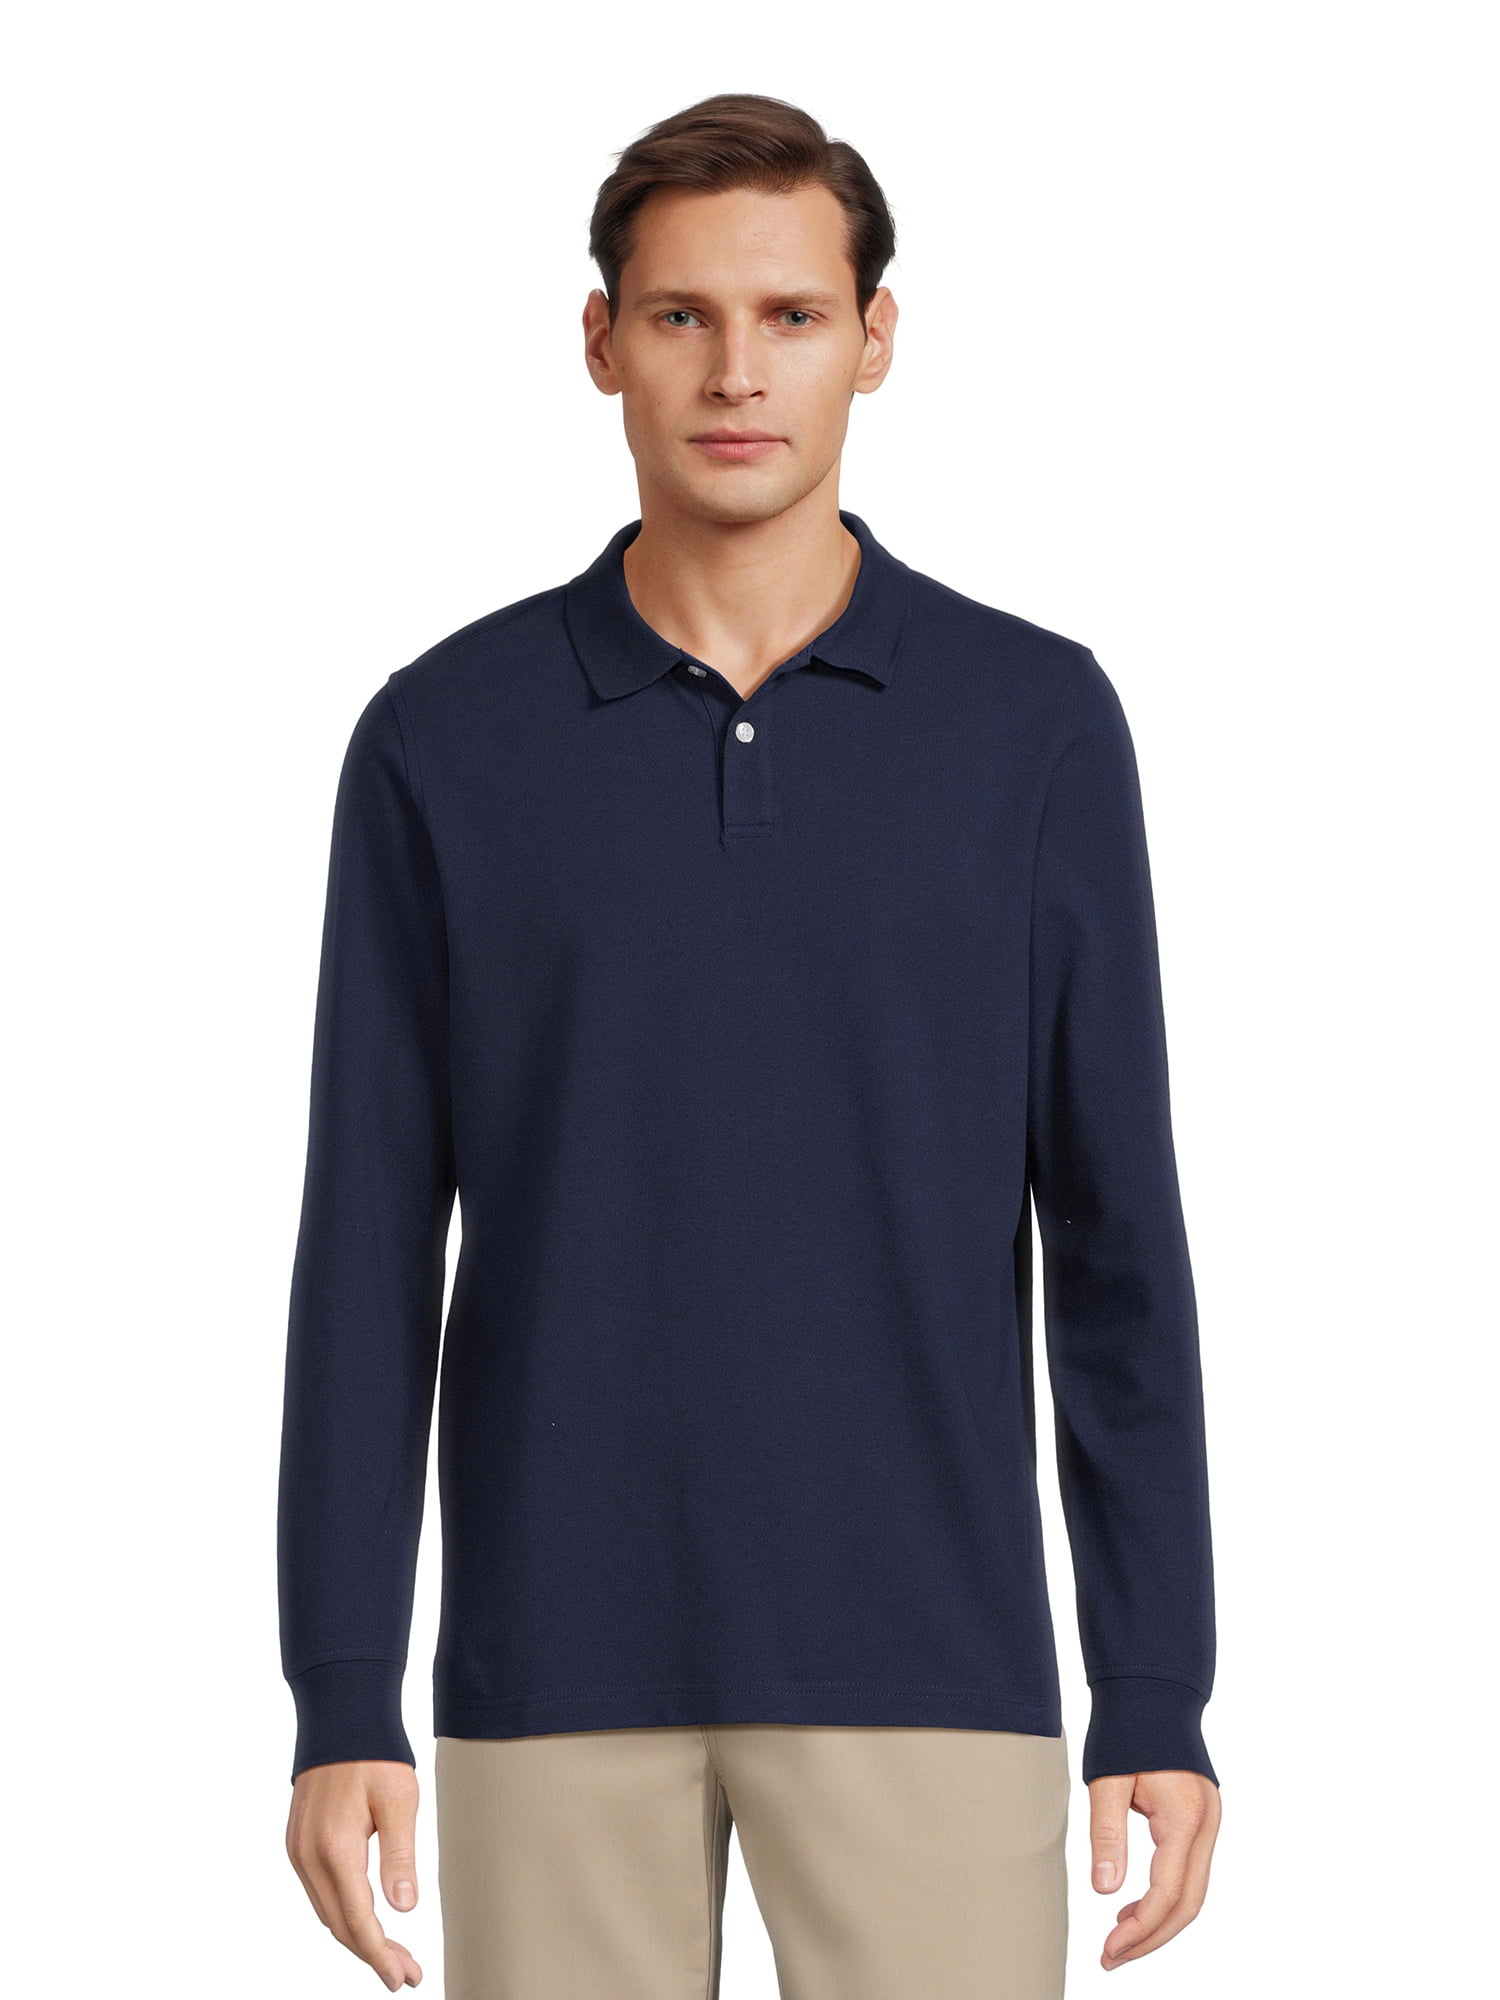 George Men's Pique Polo Shirt with Long Sleeves, Sizes S-3XL - Walmart.com